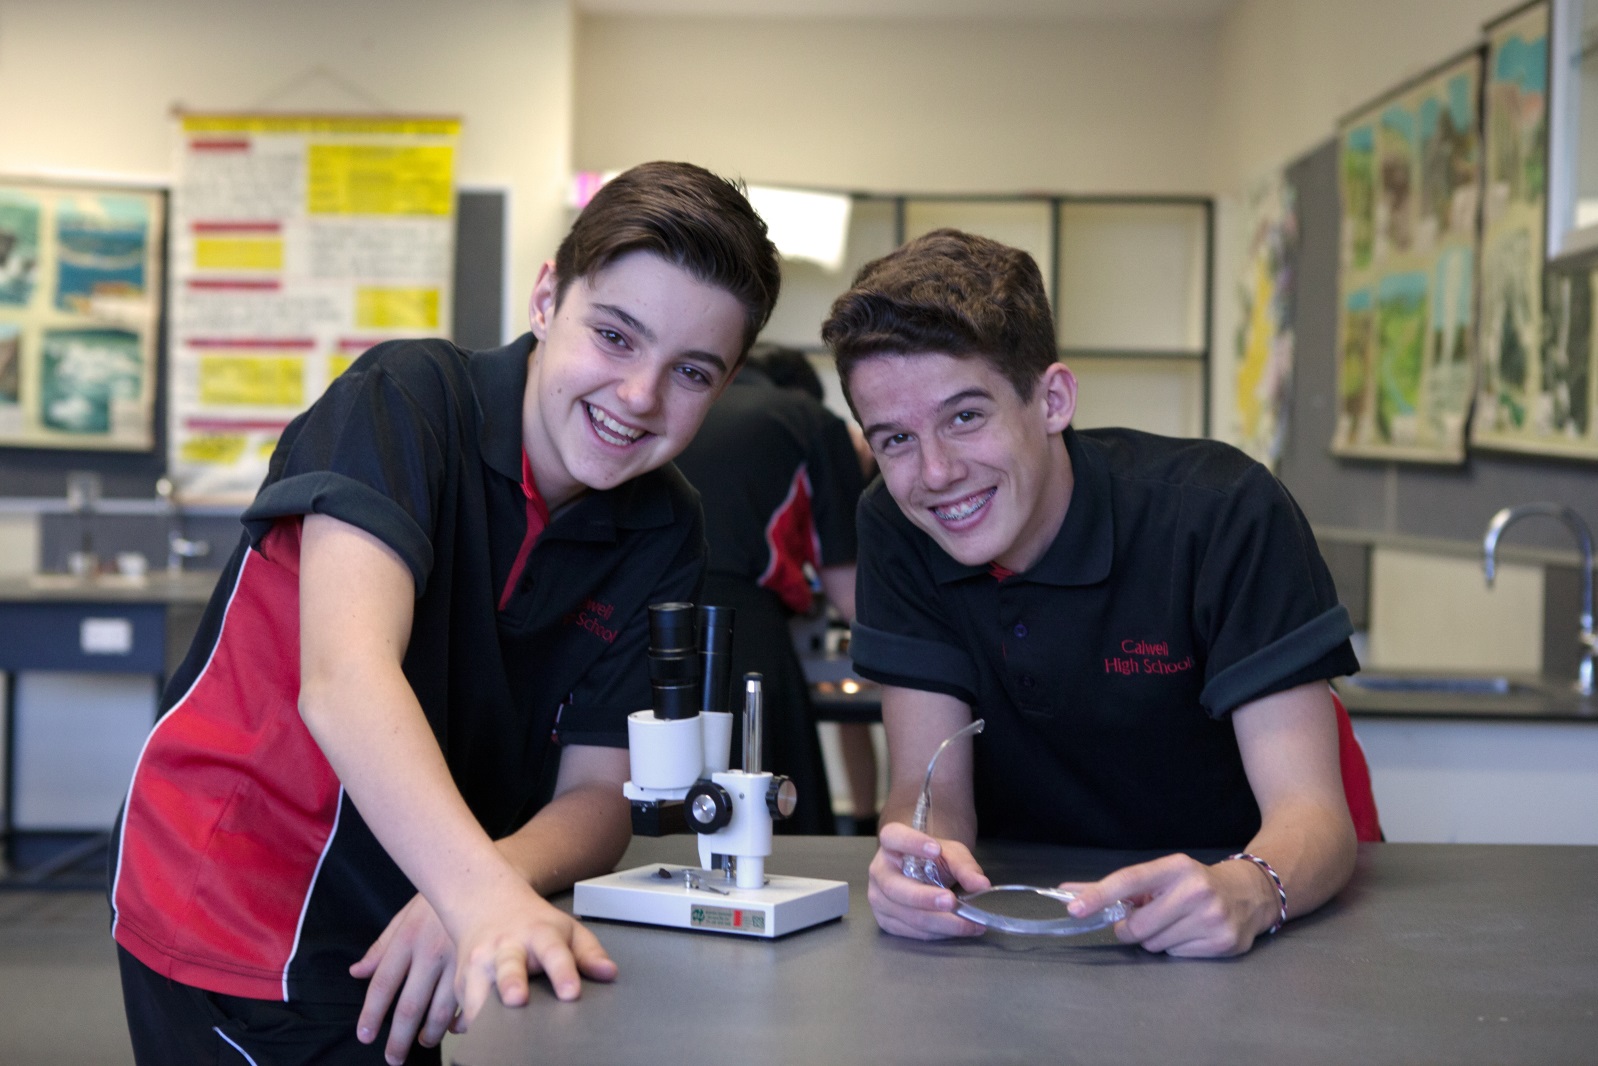 Calwell High Students in science